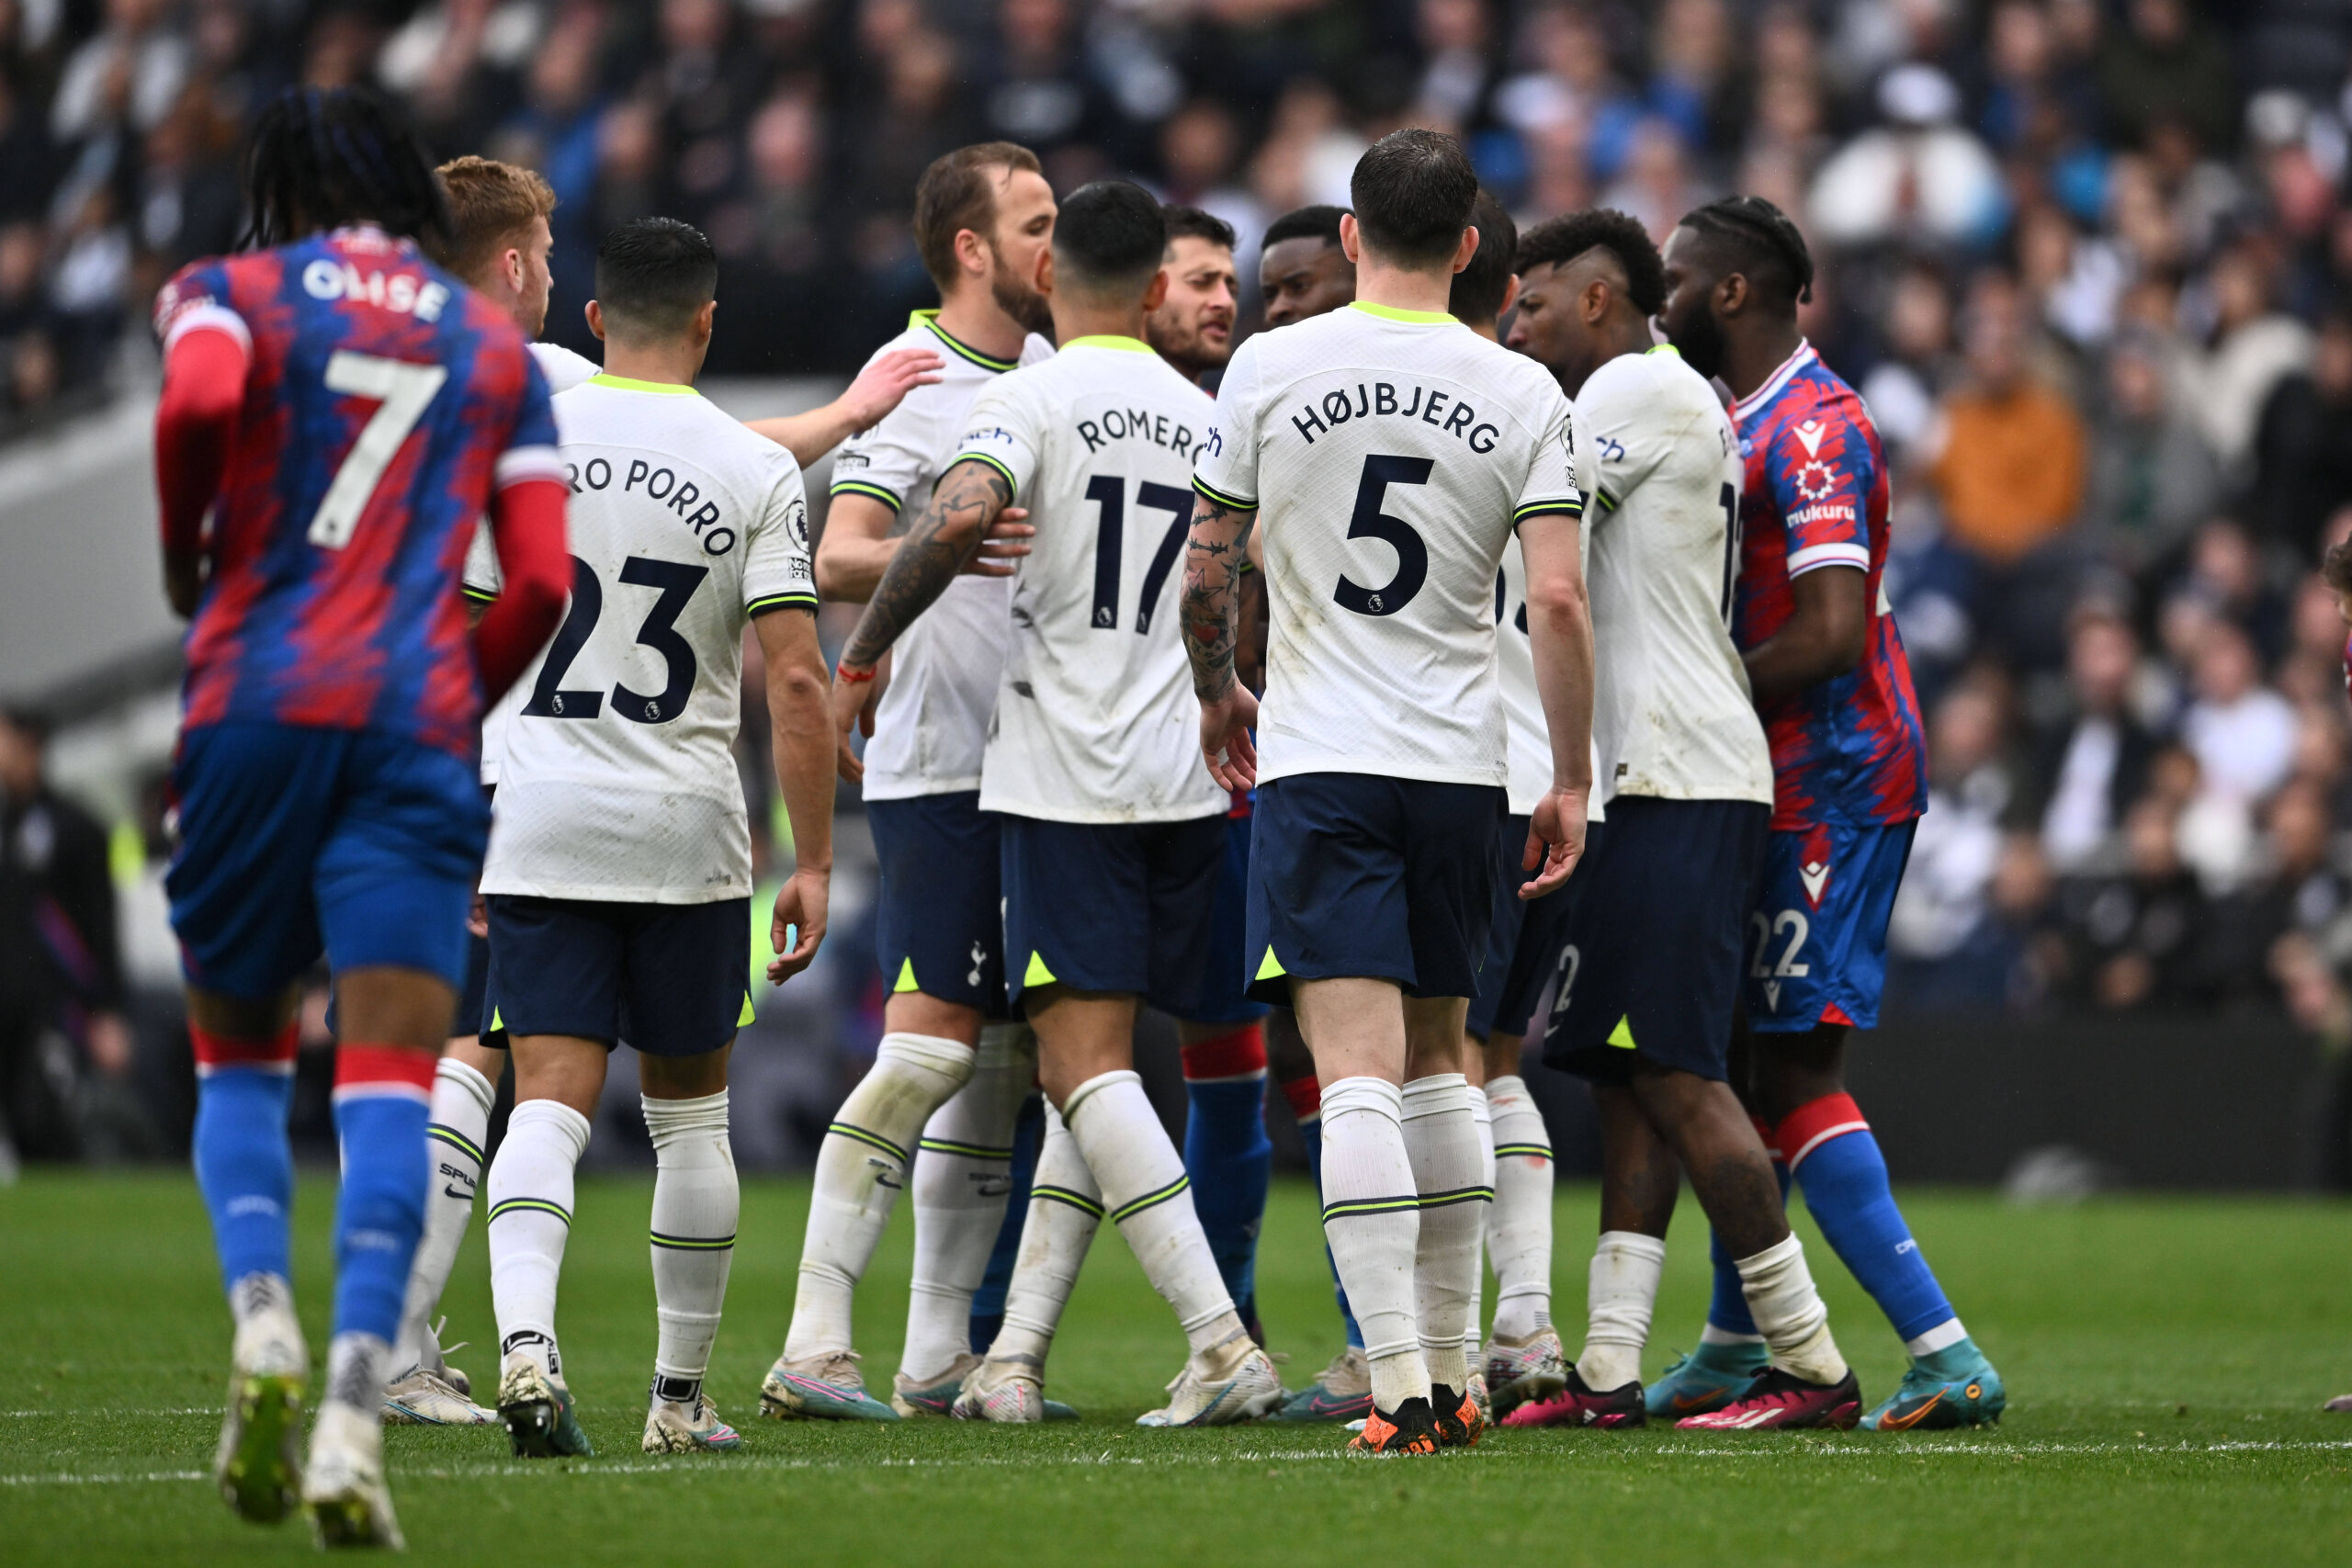 Tottenham and Crystal Palace players preparing to contest a corner kick